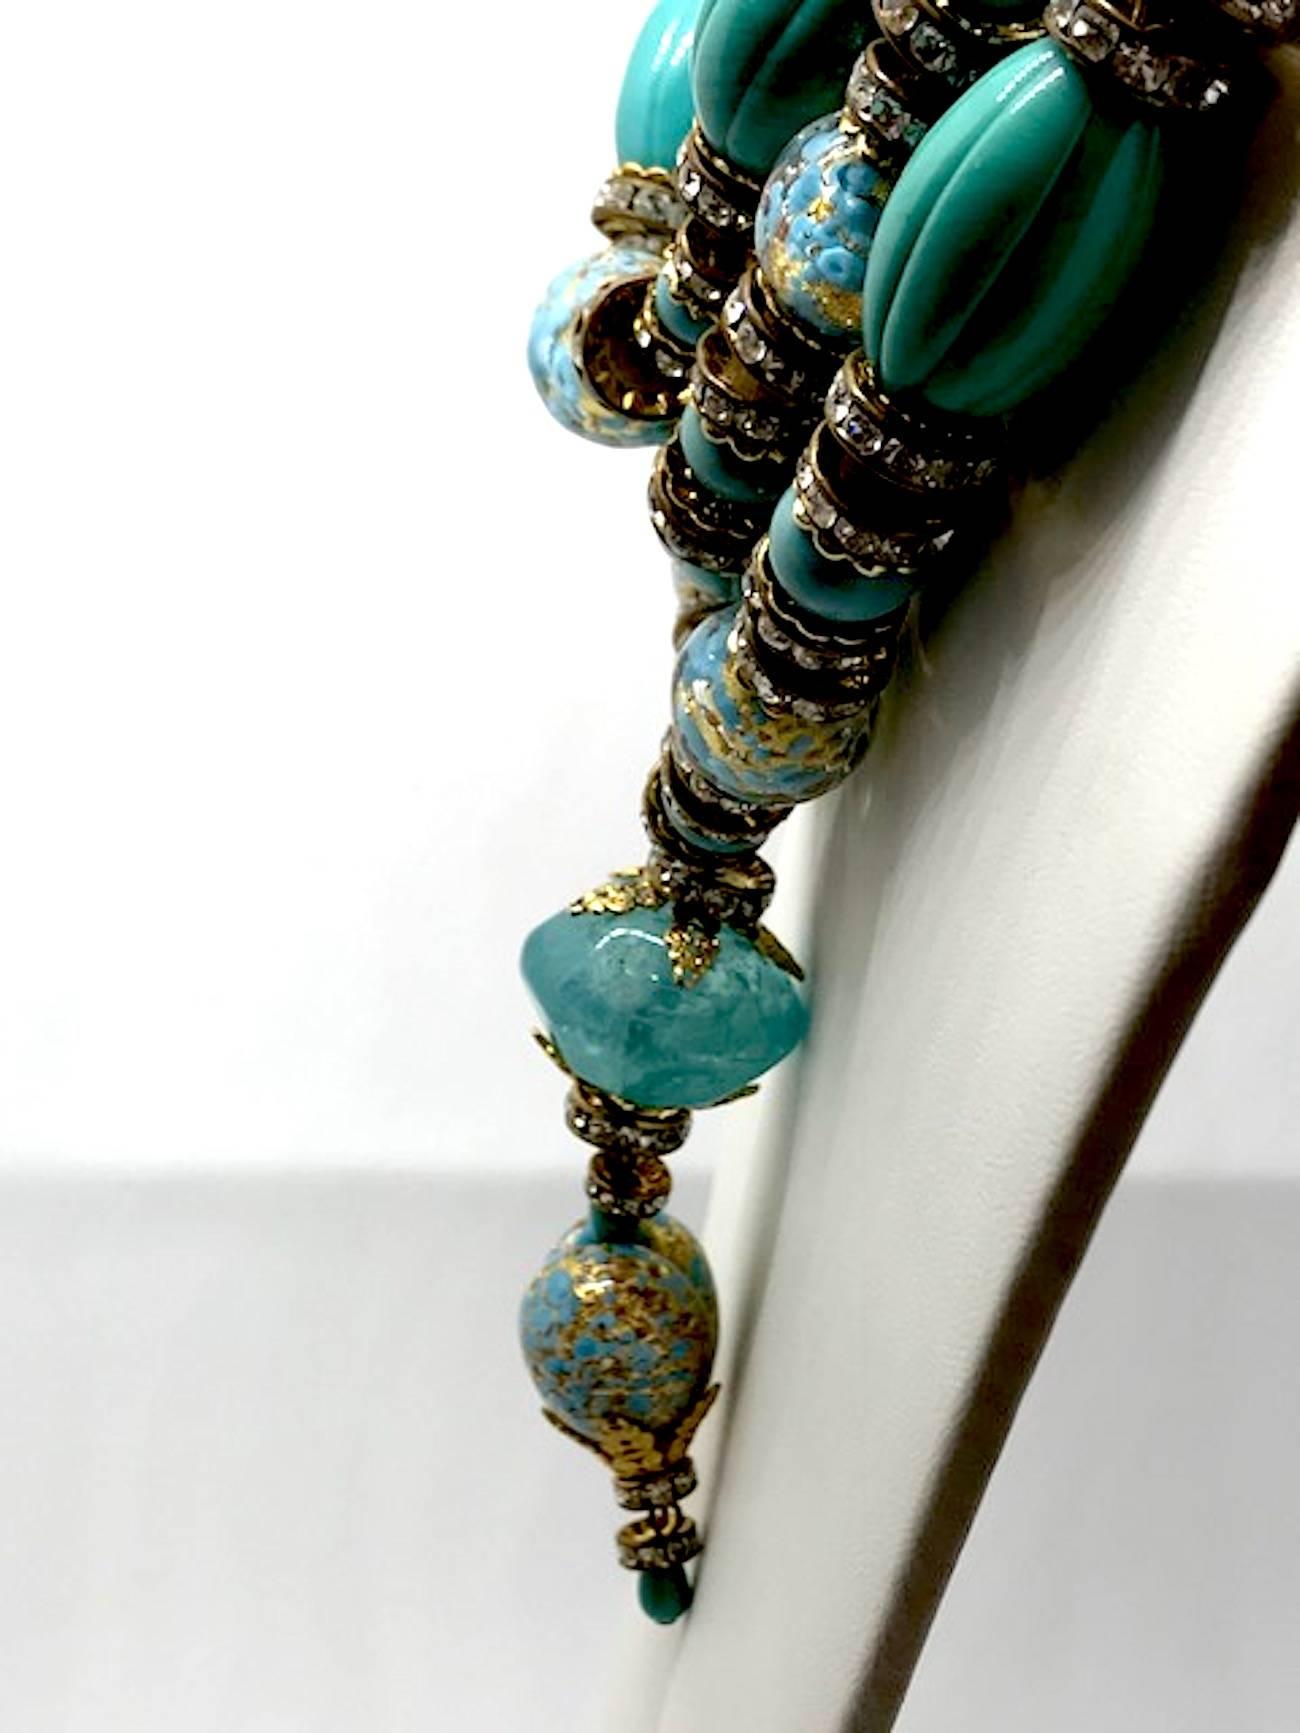 Venetian glass bead necklace from actress Elsa Martinelli's personal collection 6